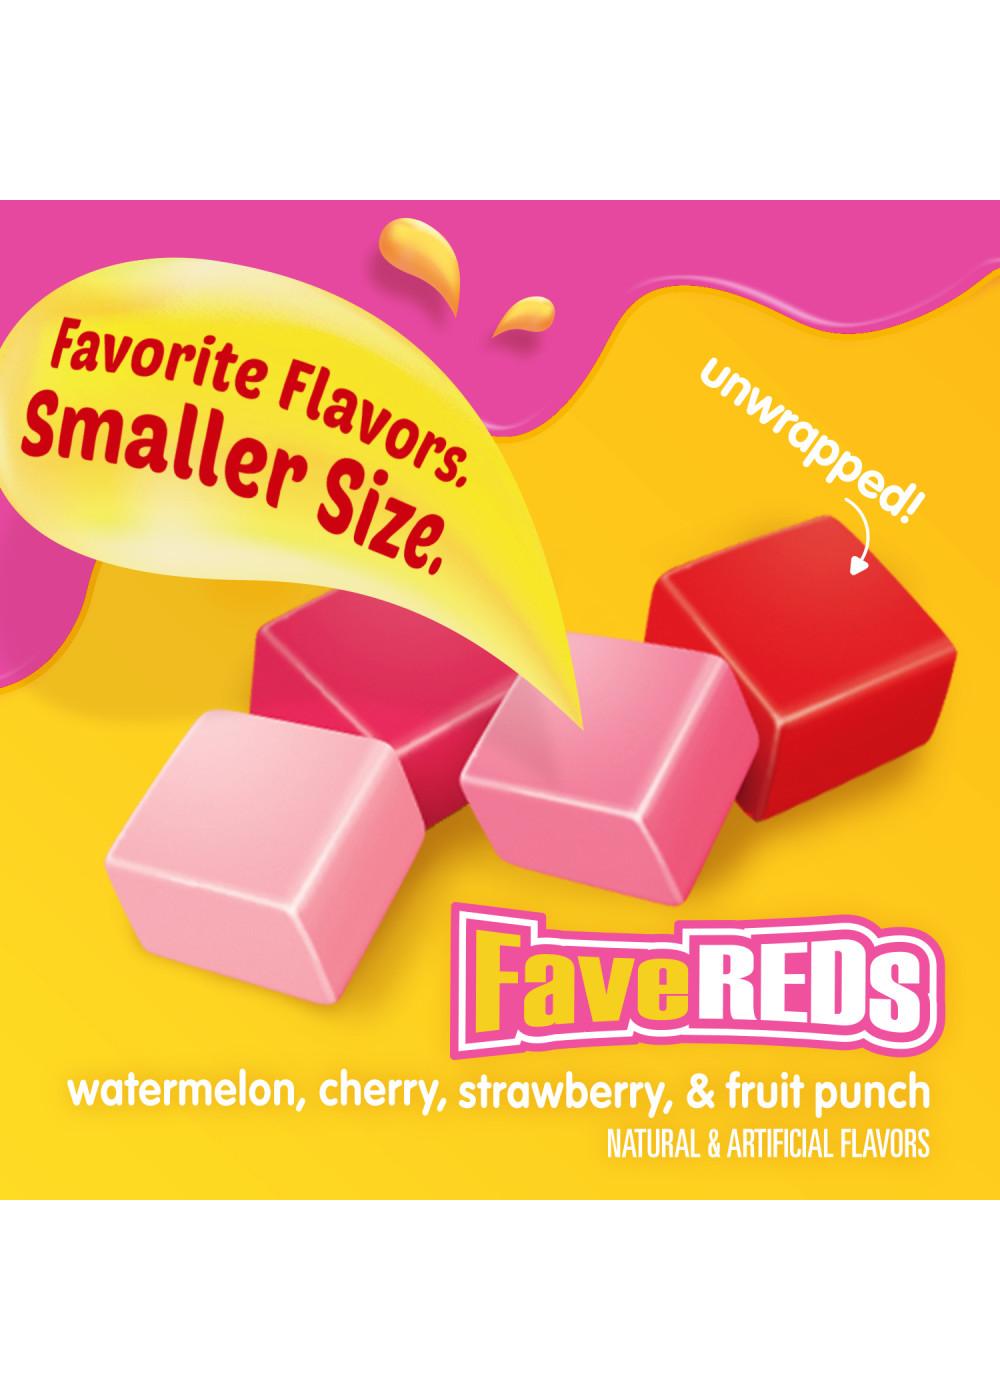 Starburst FaveReds Minis Chewy Candy - Grab & Go Size; image 2 of 5